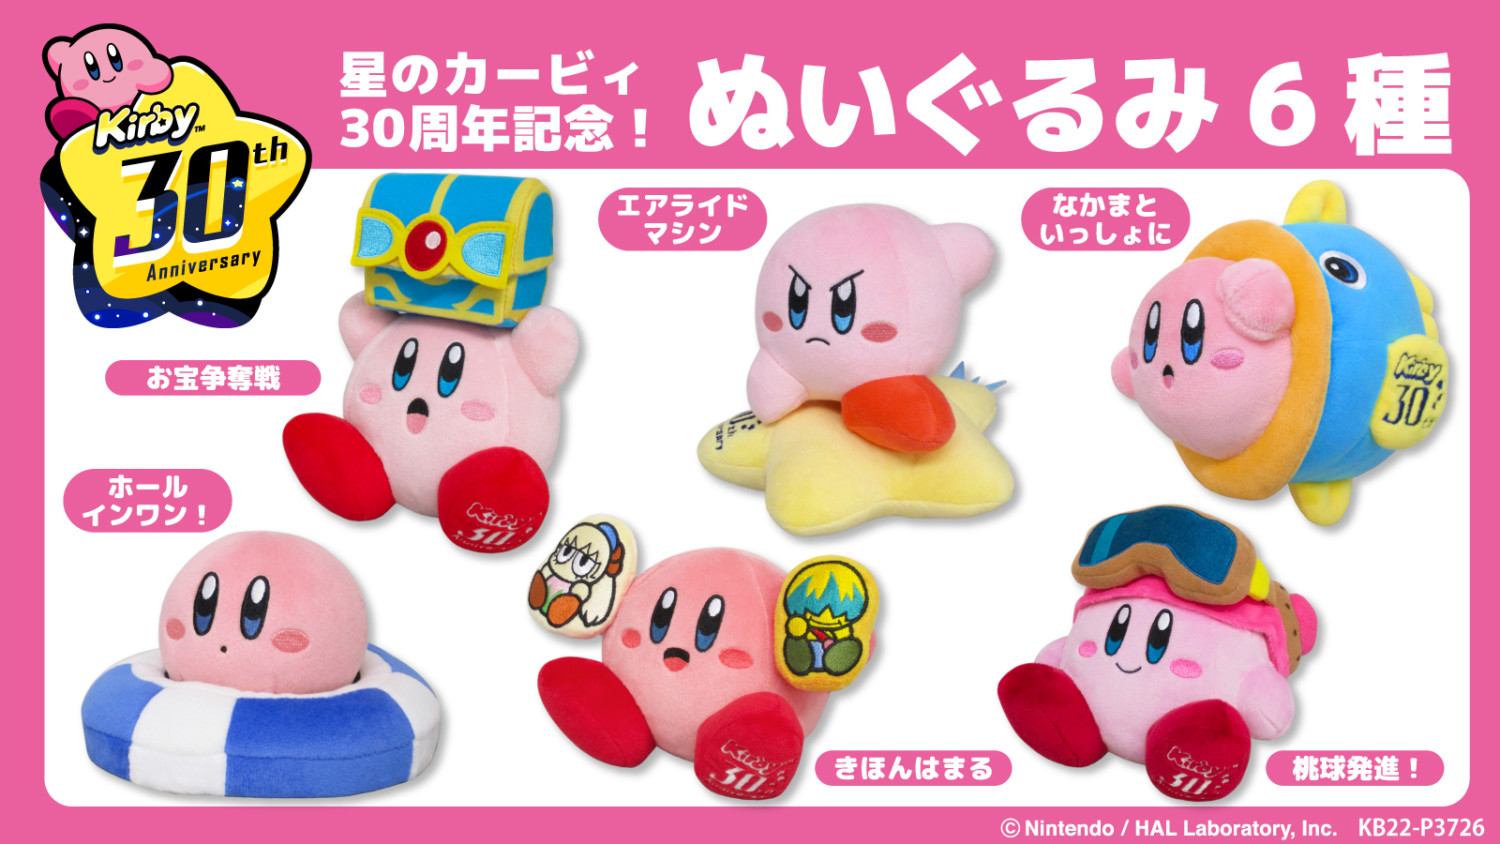 Kirby 30th Anniversary Plushies Up For Pre-Order – NintendoSoup